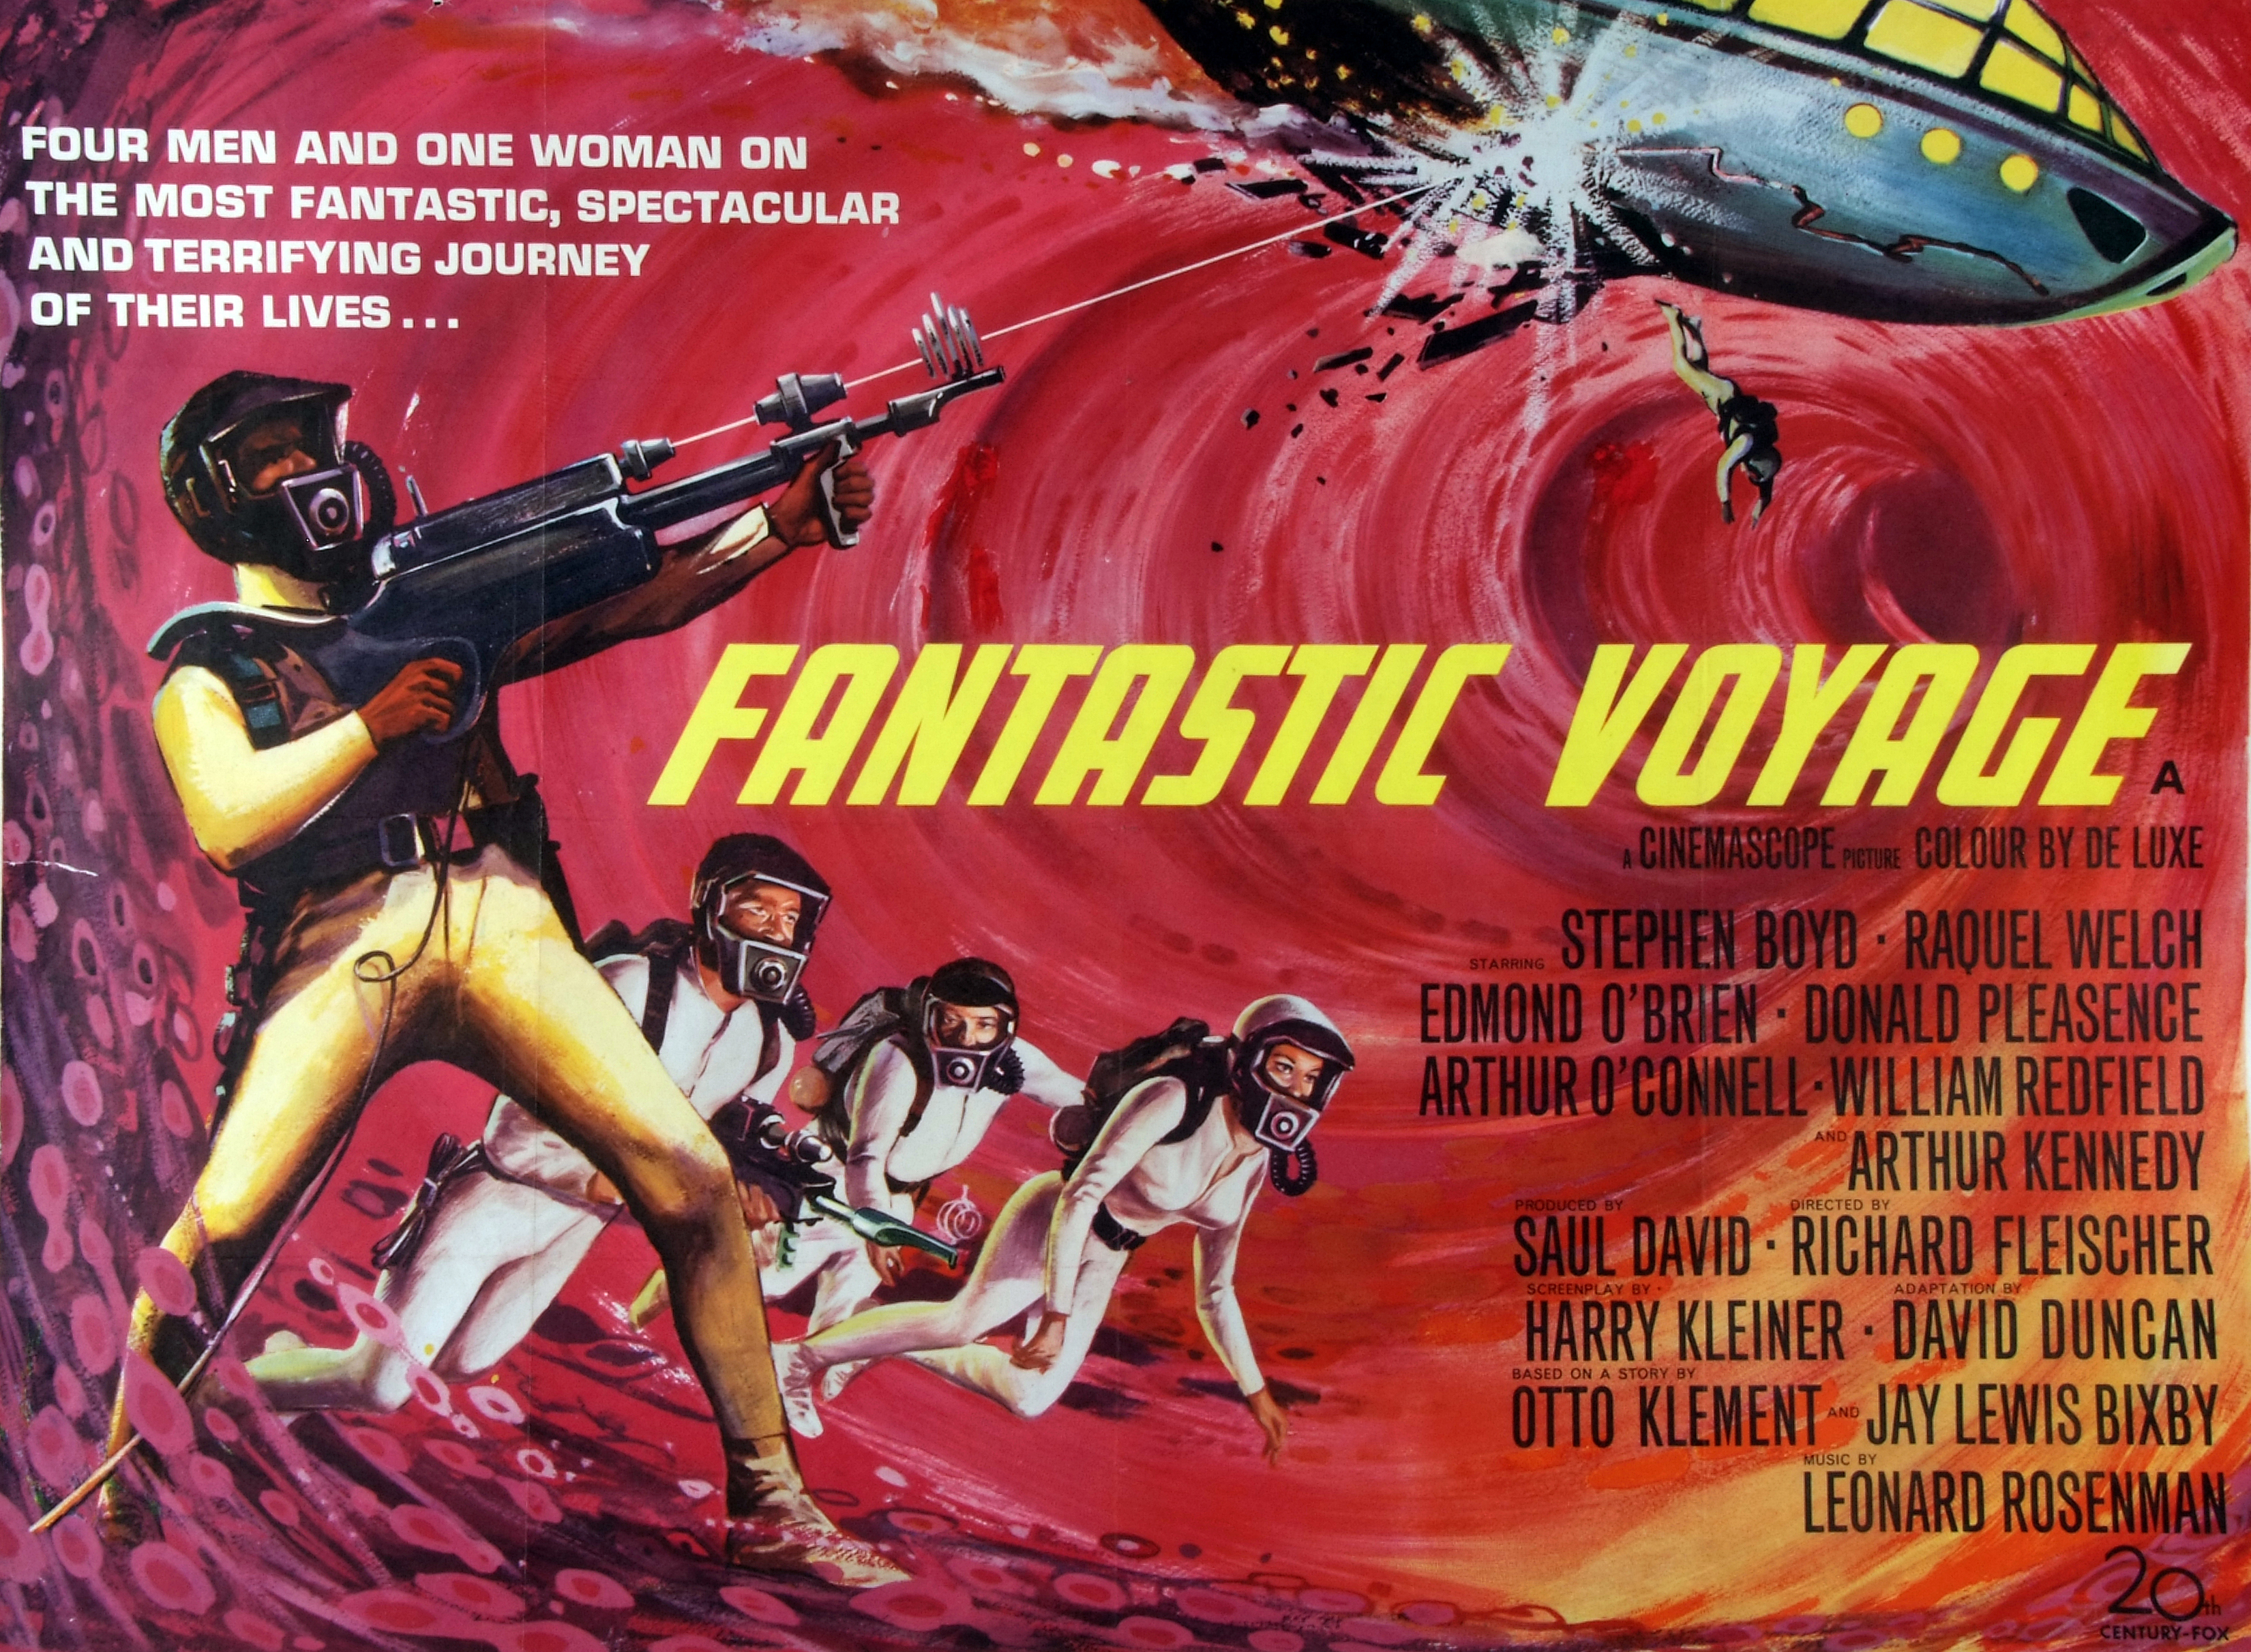 FANTASTIC VOYAGE, film poster, starring Stephen Boyd, Raquel Welch and others, Quad approx 30" x 40"